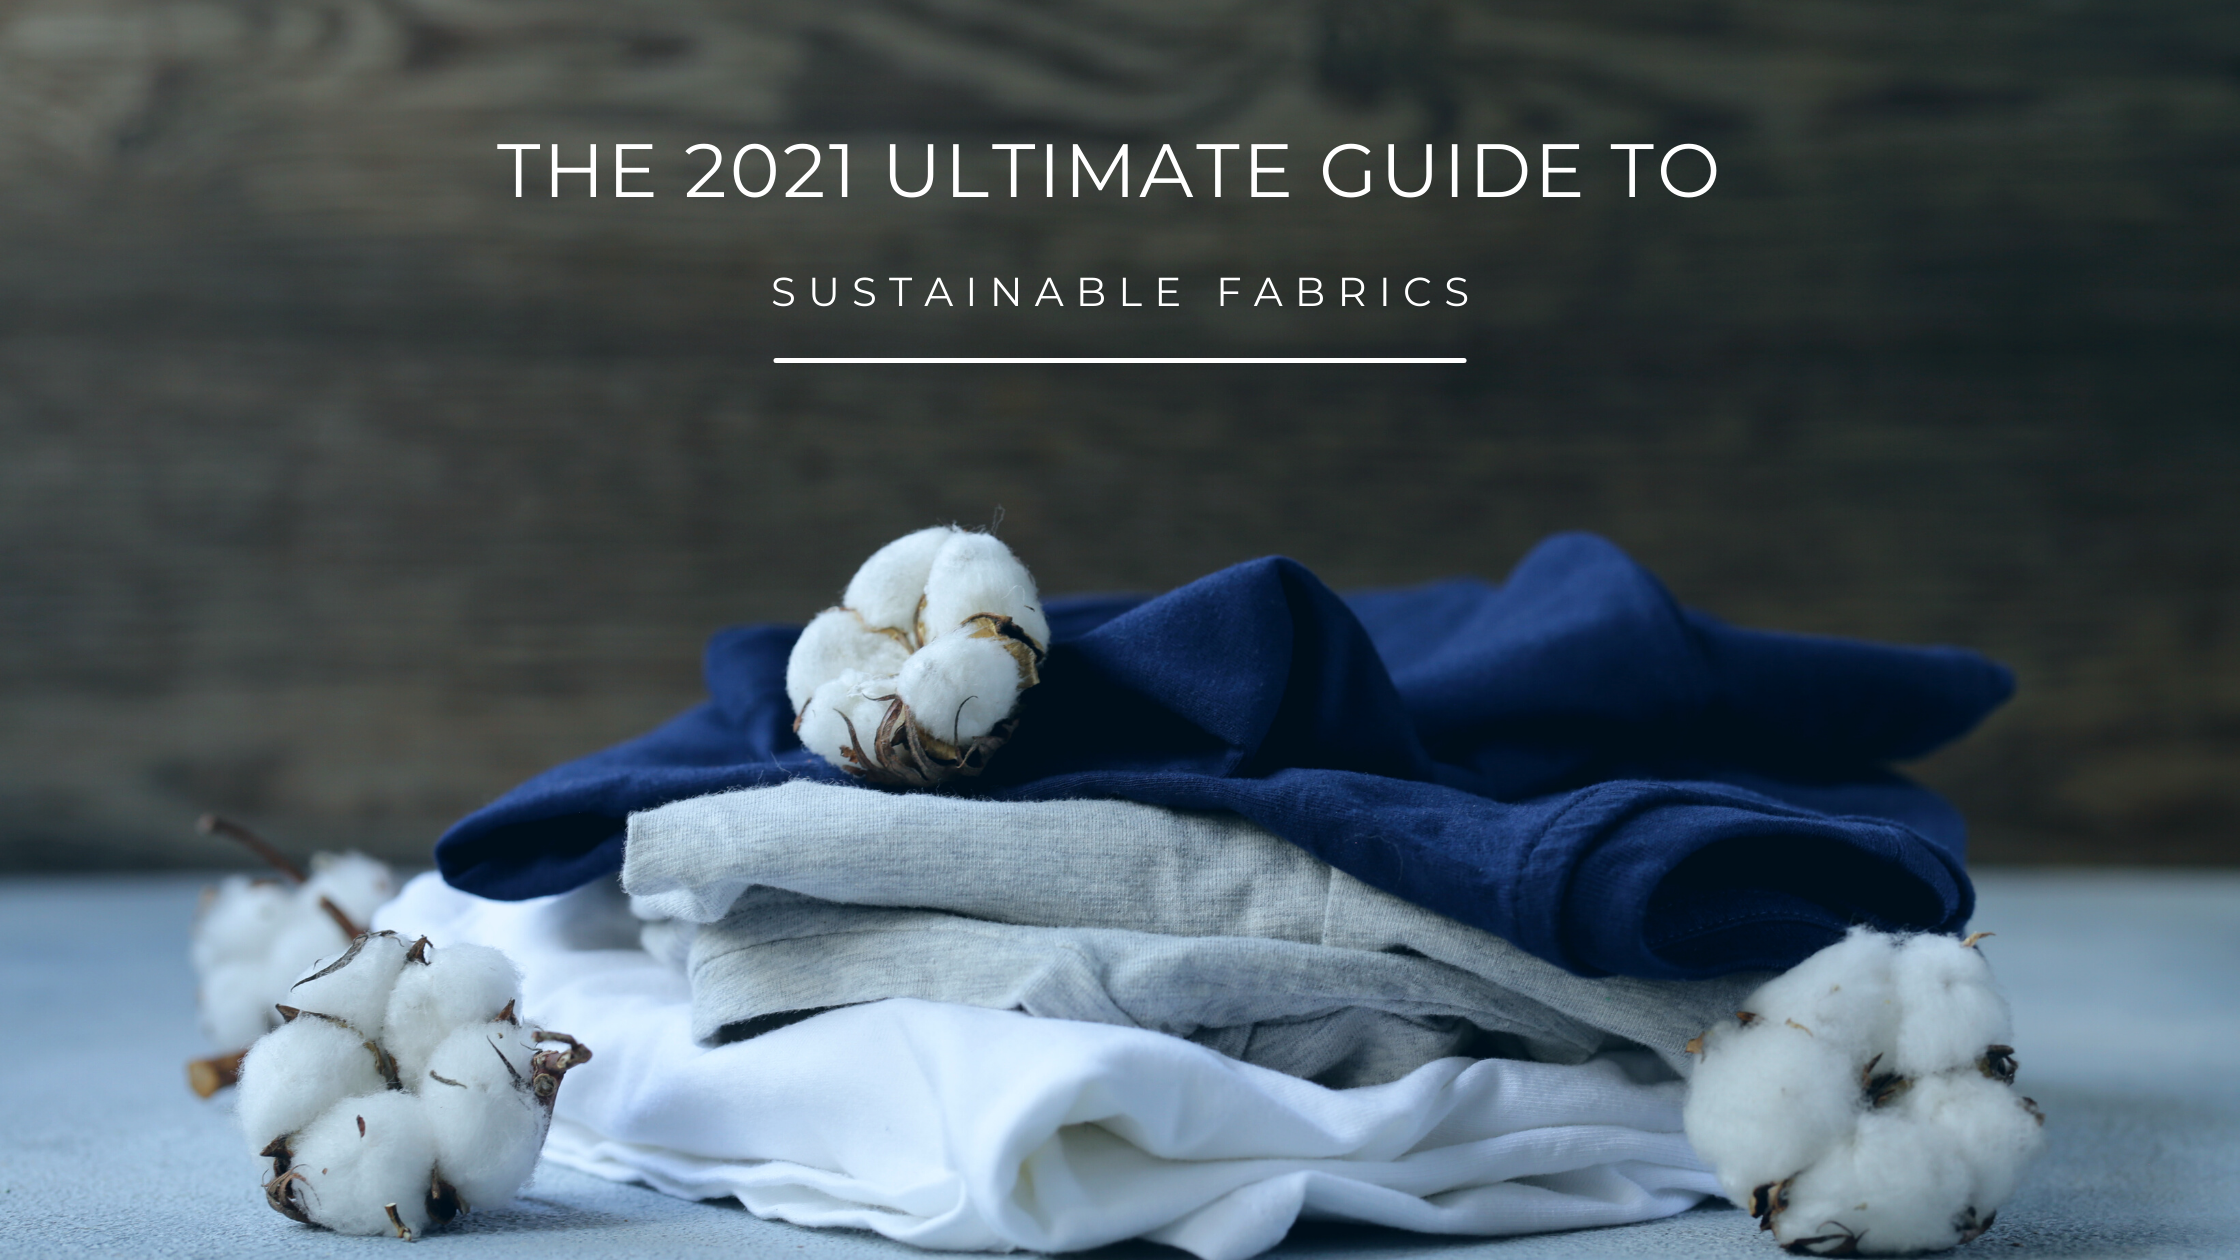 The 2021 Ultimate Guide to Sustainable Fabrics - OCEANR